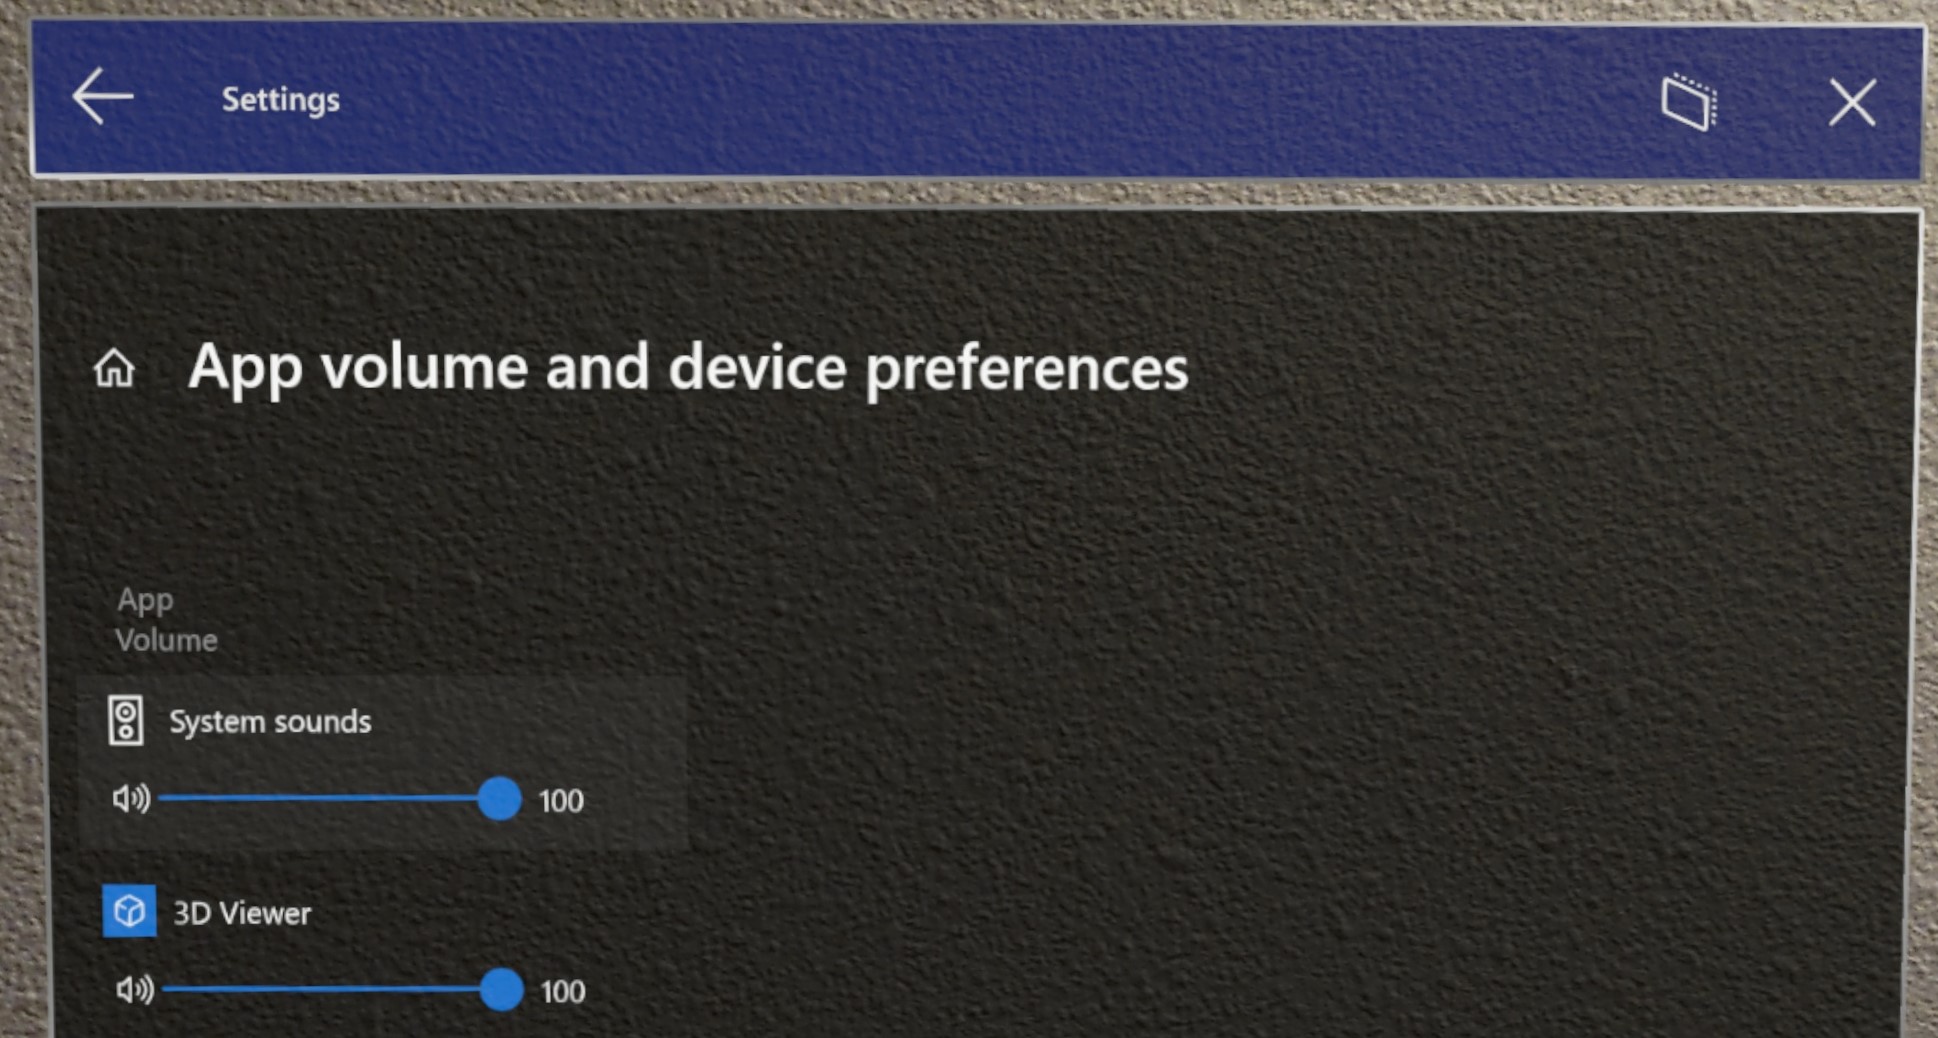 App volume and device preferences.